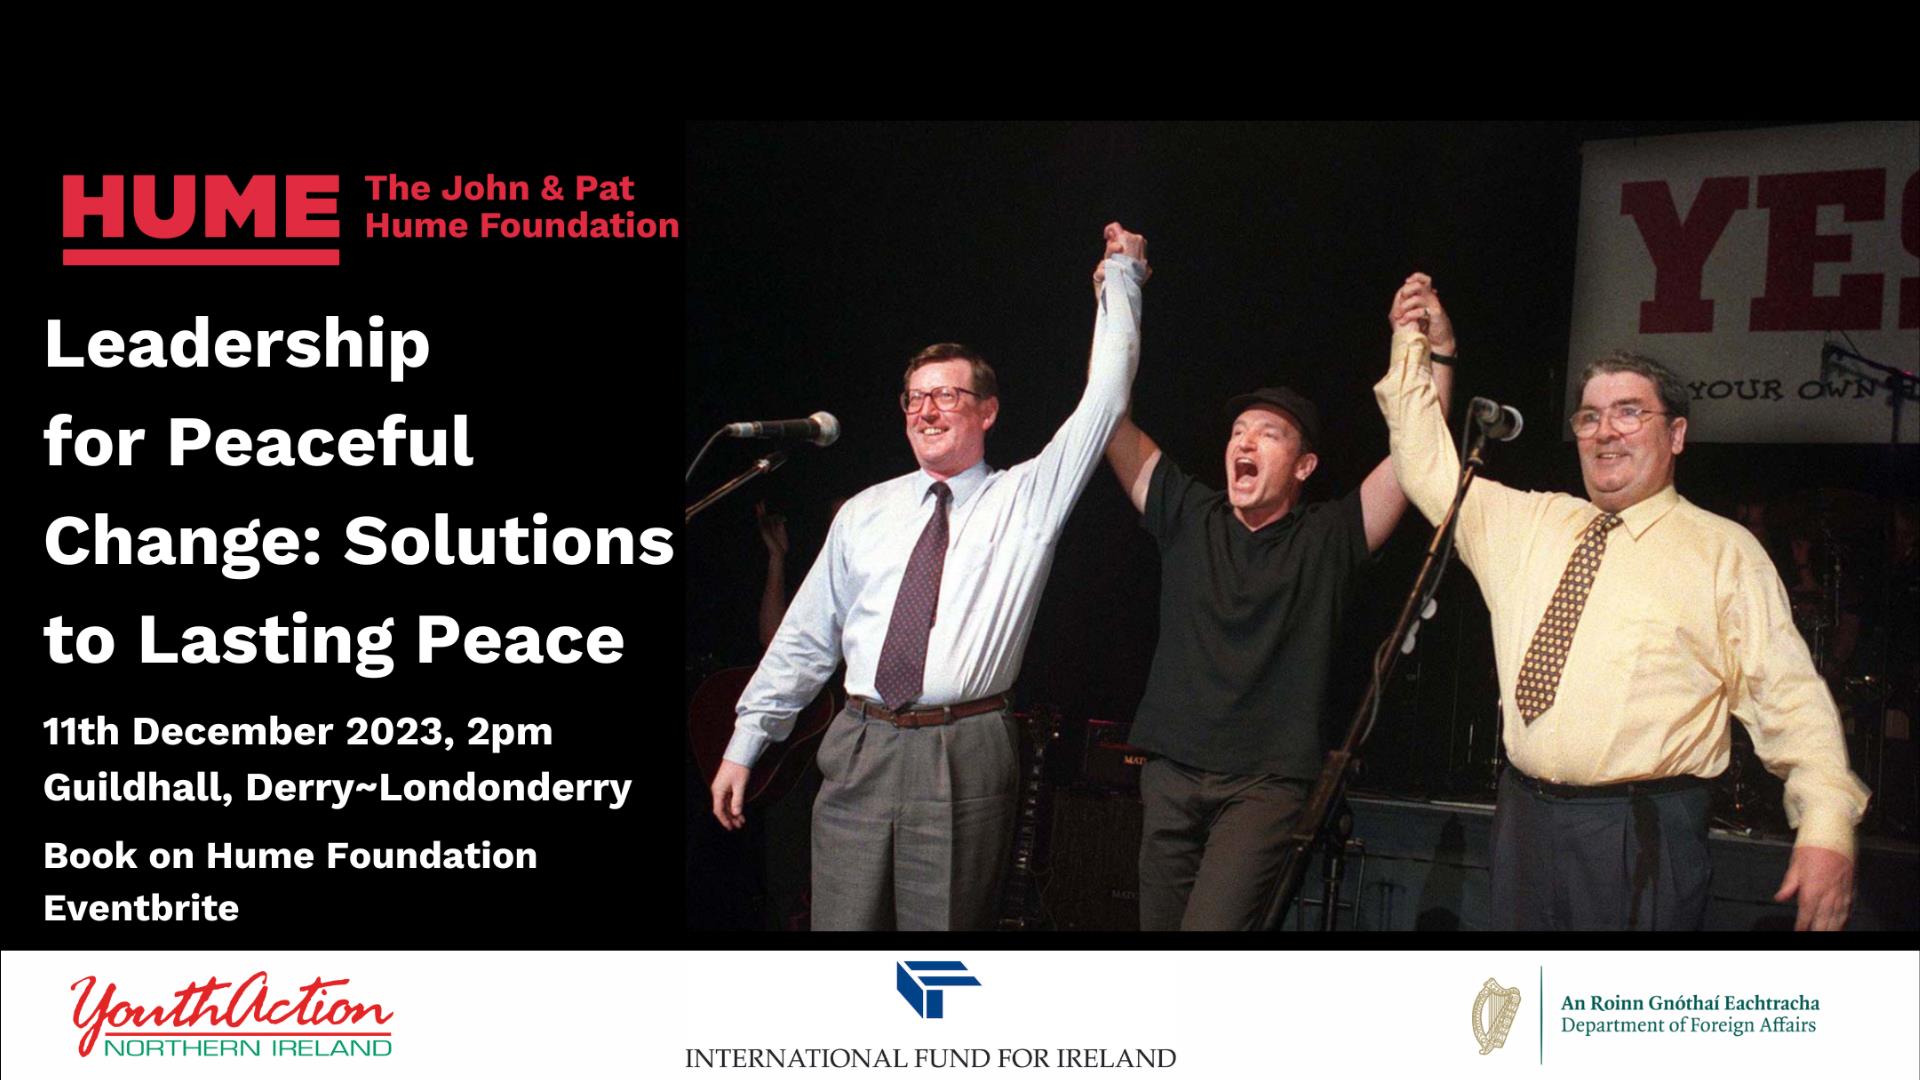 Leadership for Peaceful Change: Solutions to Lasting Peace event